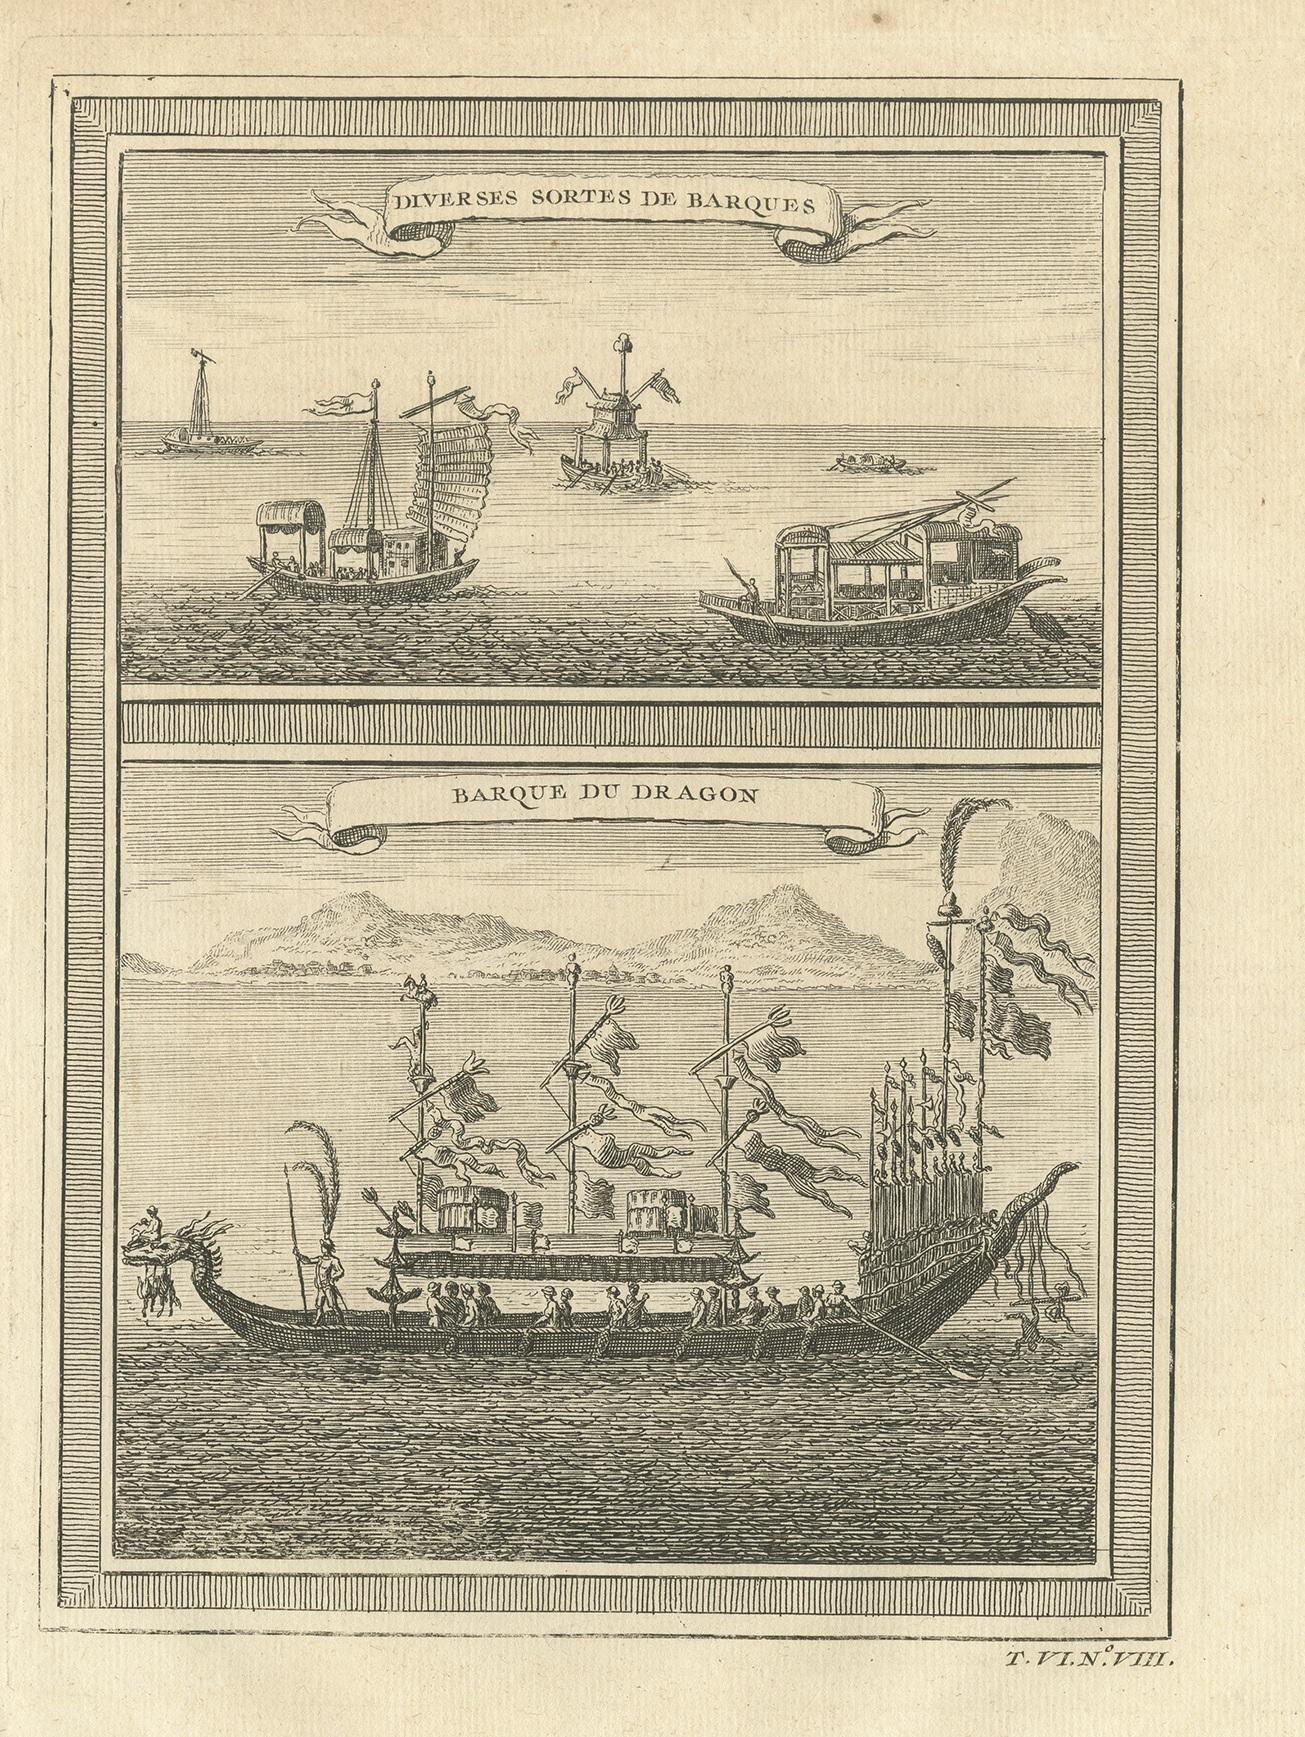 Antique print titled 'Diverses Sortes de Barques - Barque du Dragon'. View of Chinese vessels. The top view depicts various types of Chinese barque, including a small vessel at centre that is topped with a high canopy with a shrine on its roof and a